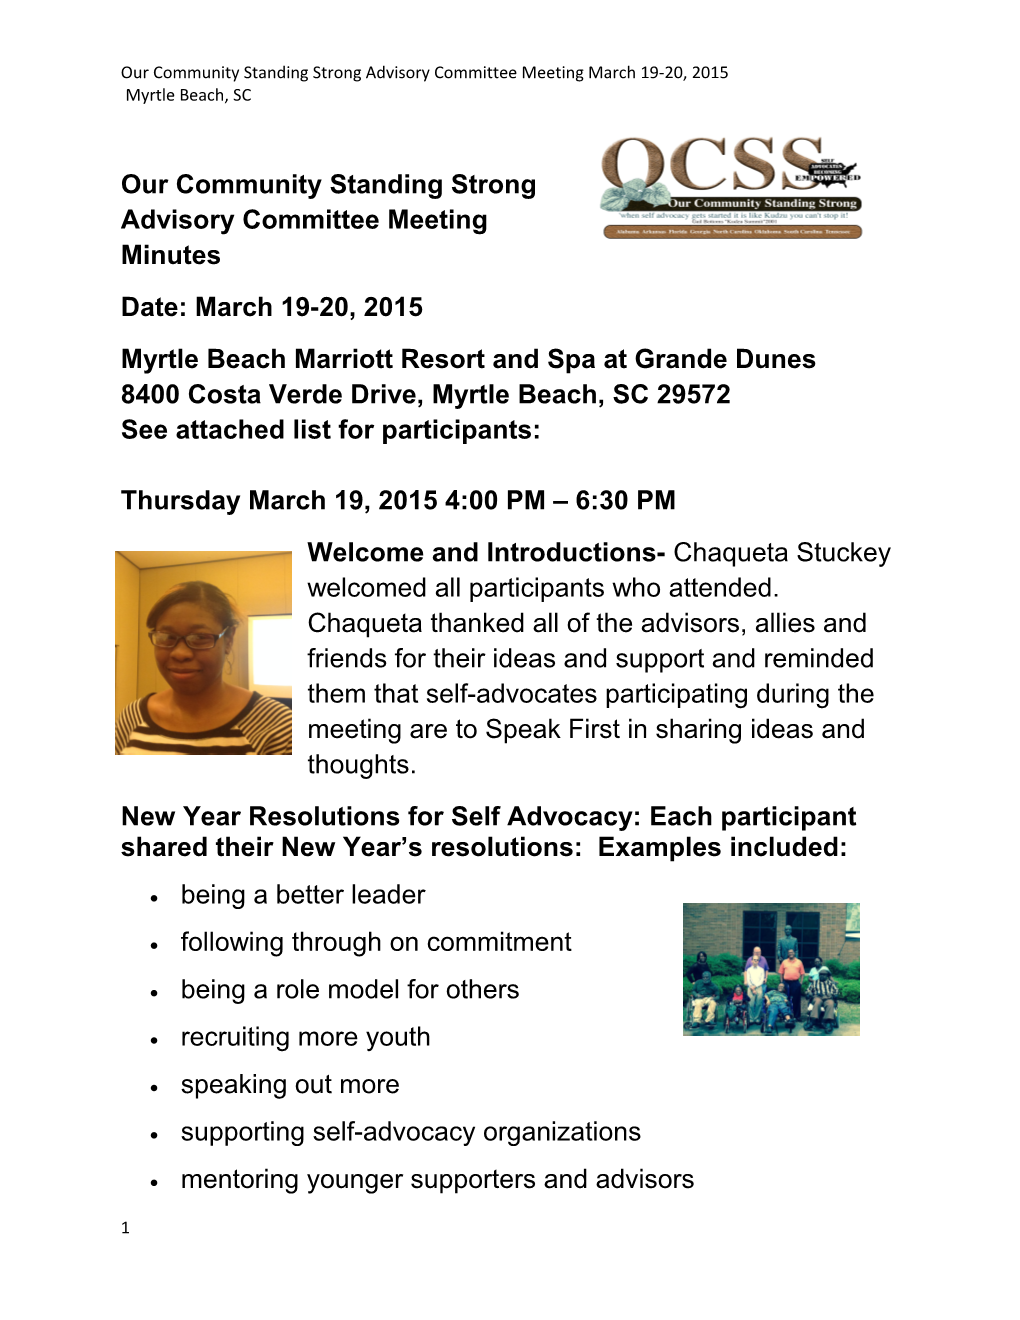 Our Community Standing Strong Advisory Committee Meeting Minutes